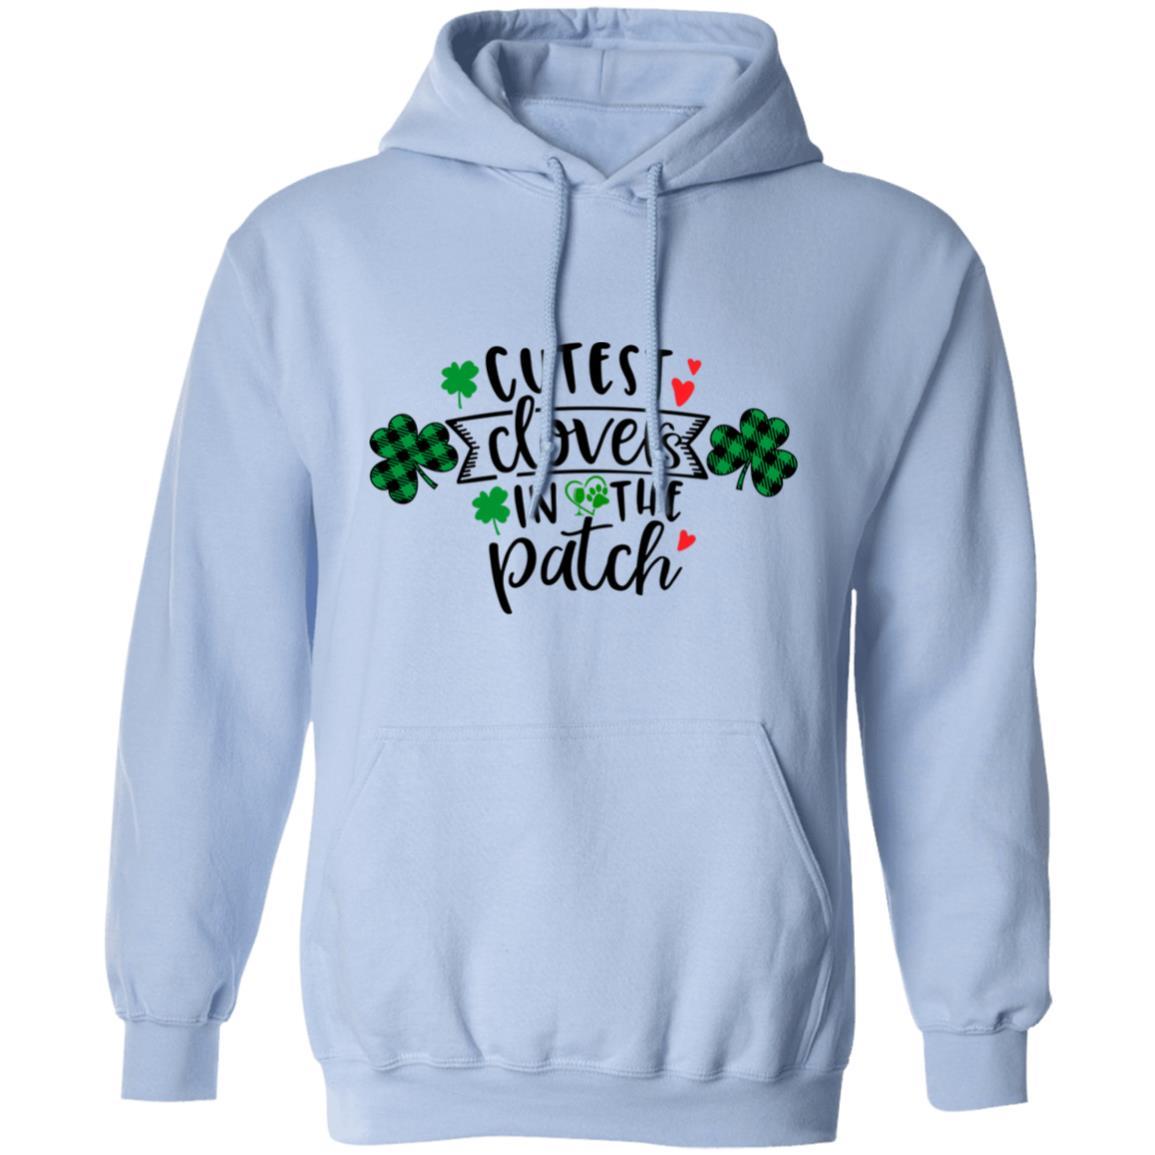 Sweatshirts Light Blue / S Winey Bitches Co "Cutest Clovers in the Patch" Pullover Hoodie 8 oz. WineyBitchesCo